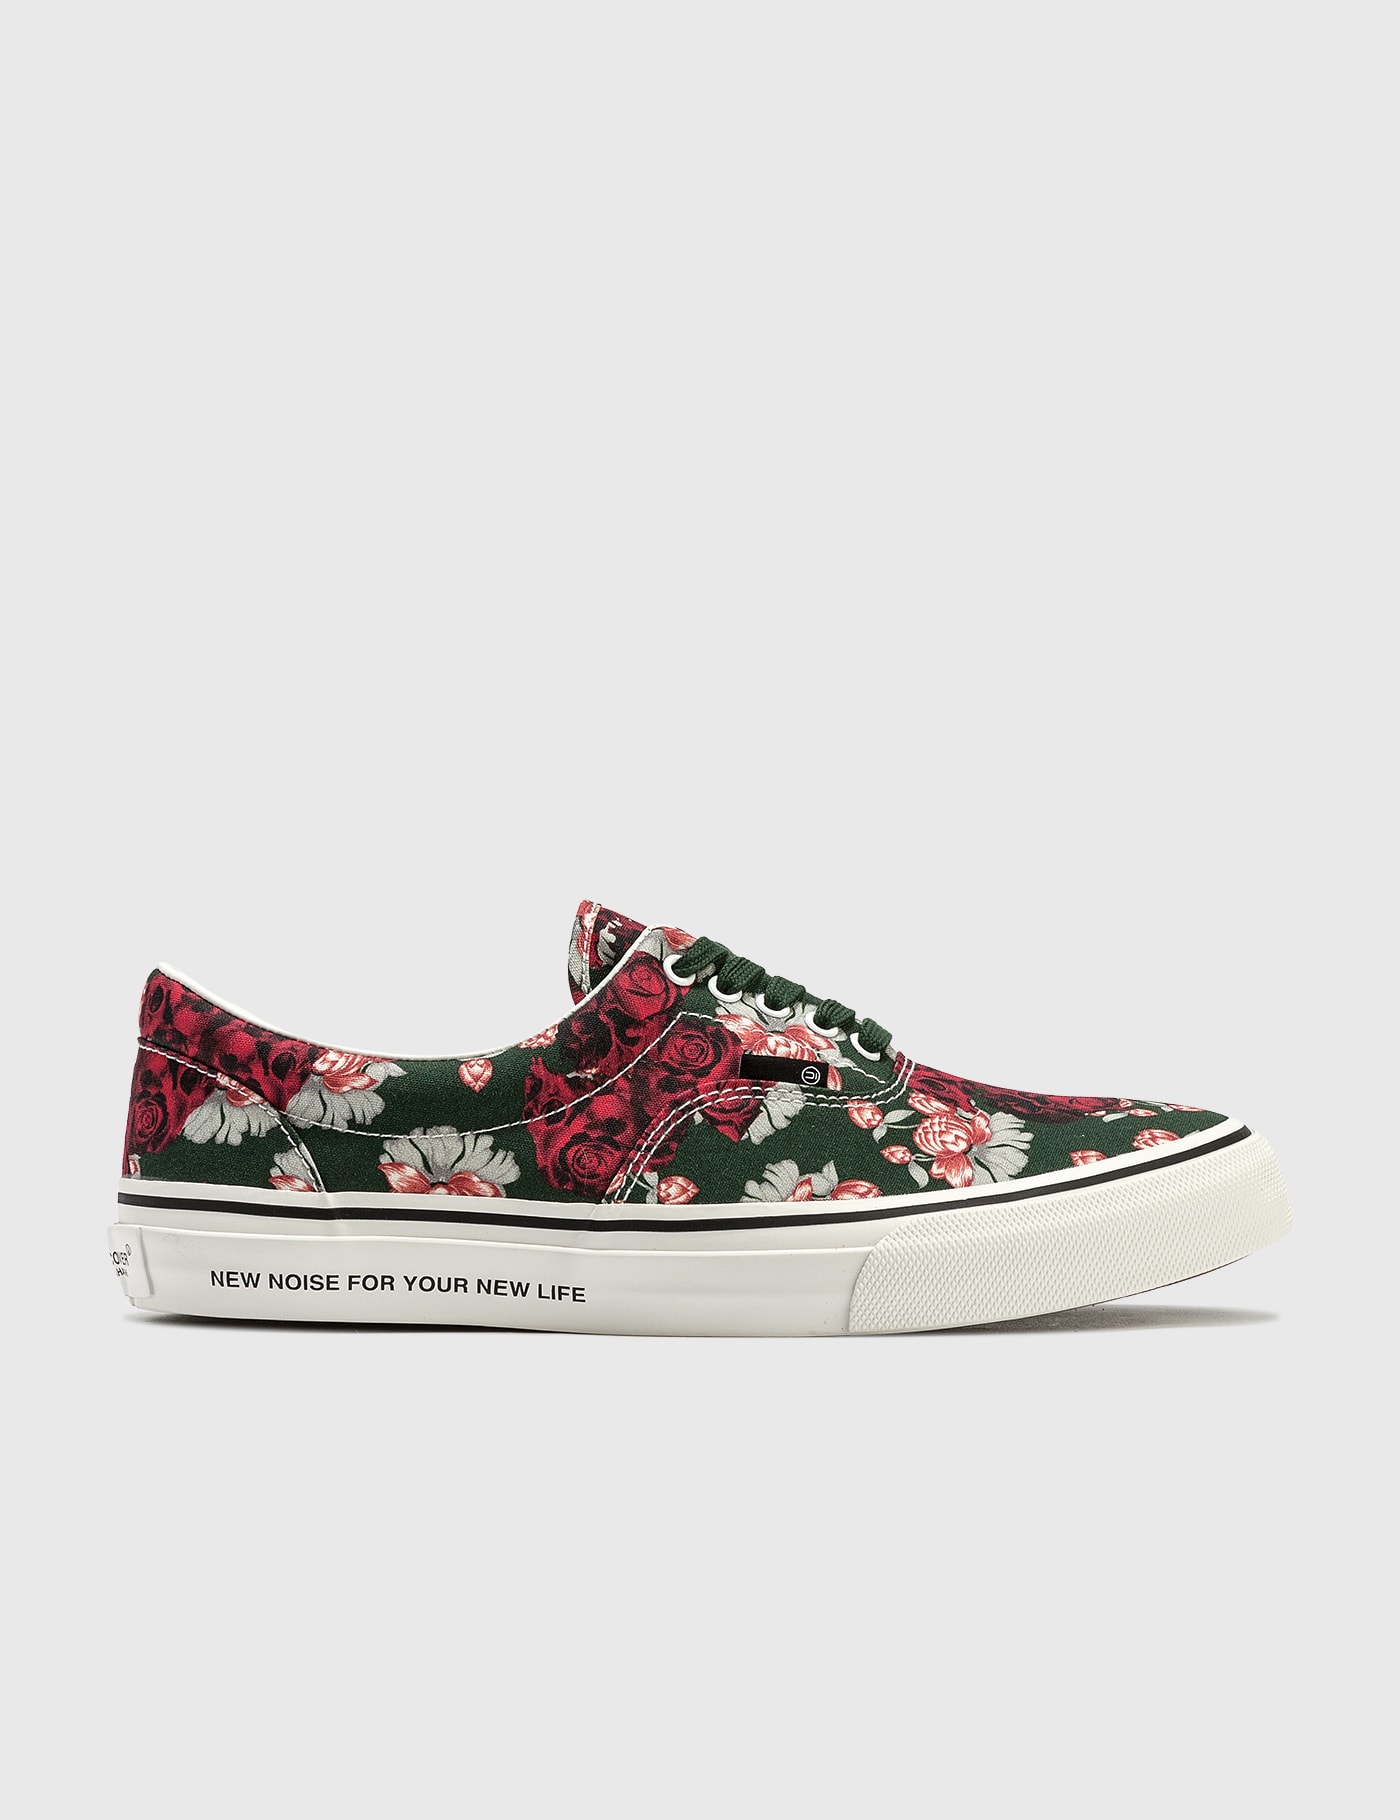 UNDERCOVER PRINTED CANVAS SNEAKERS